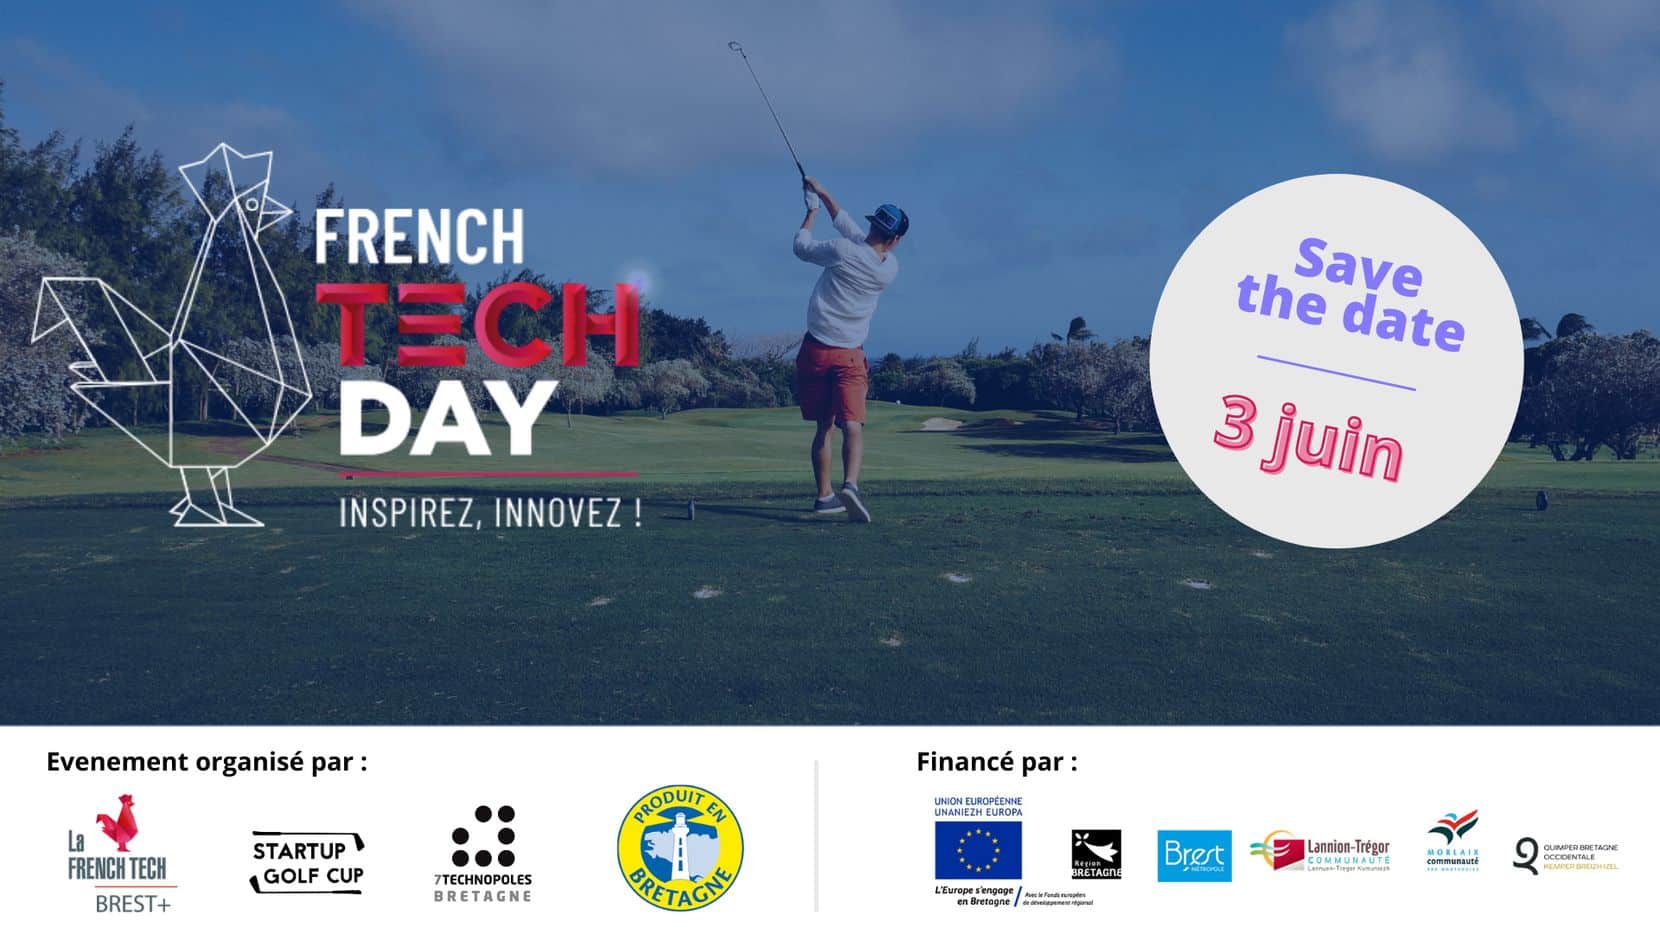 French tech day 3 juin